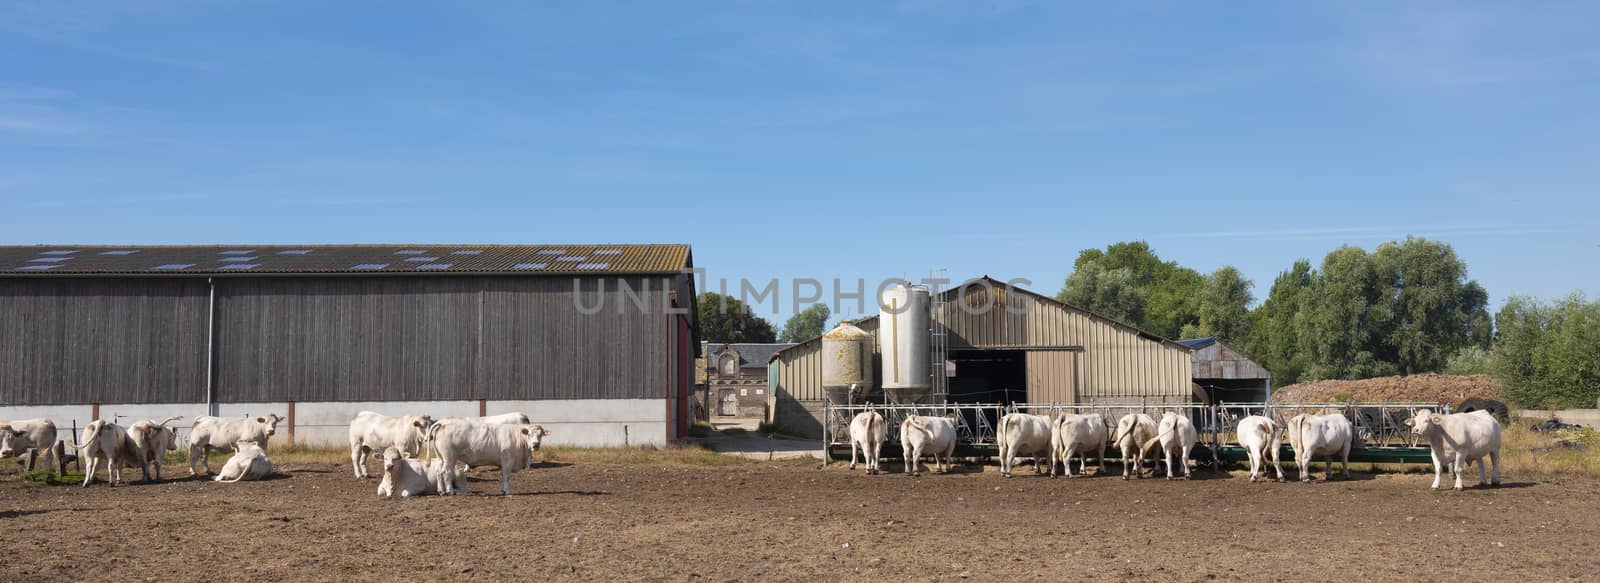 white cows and old farm near boulogne in french normandy on sunny summer day